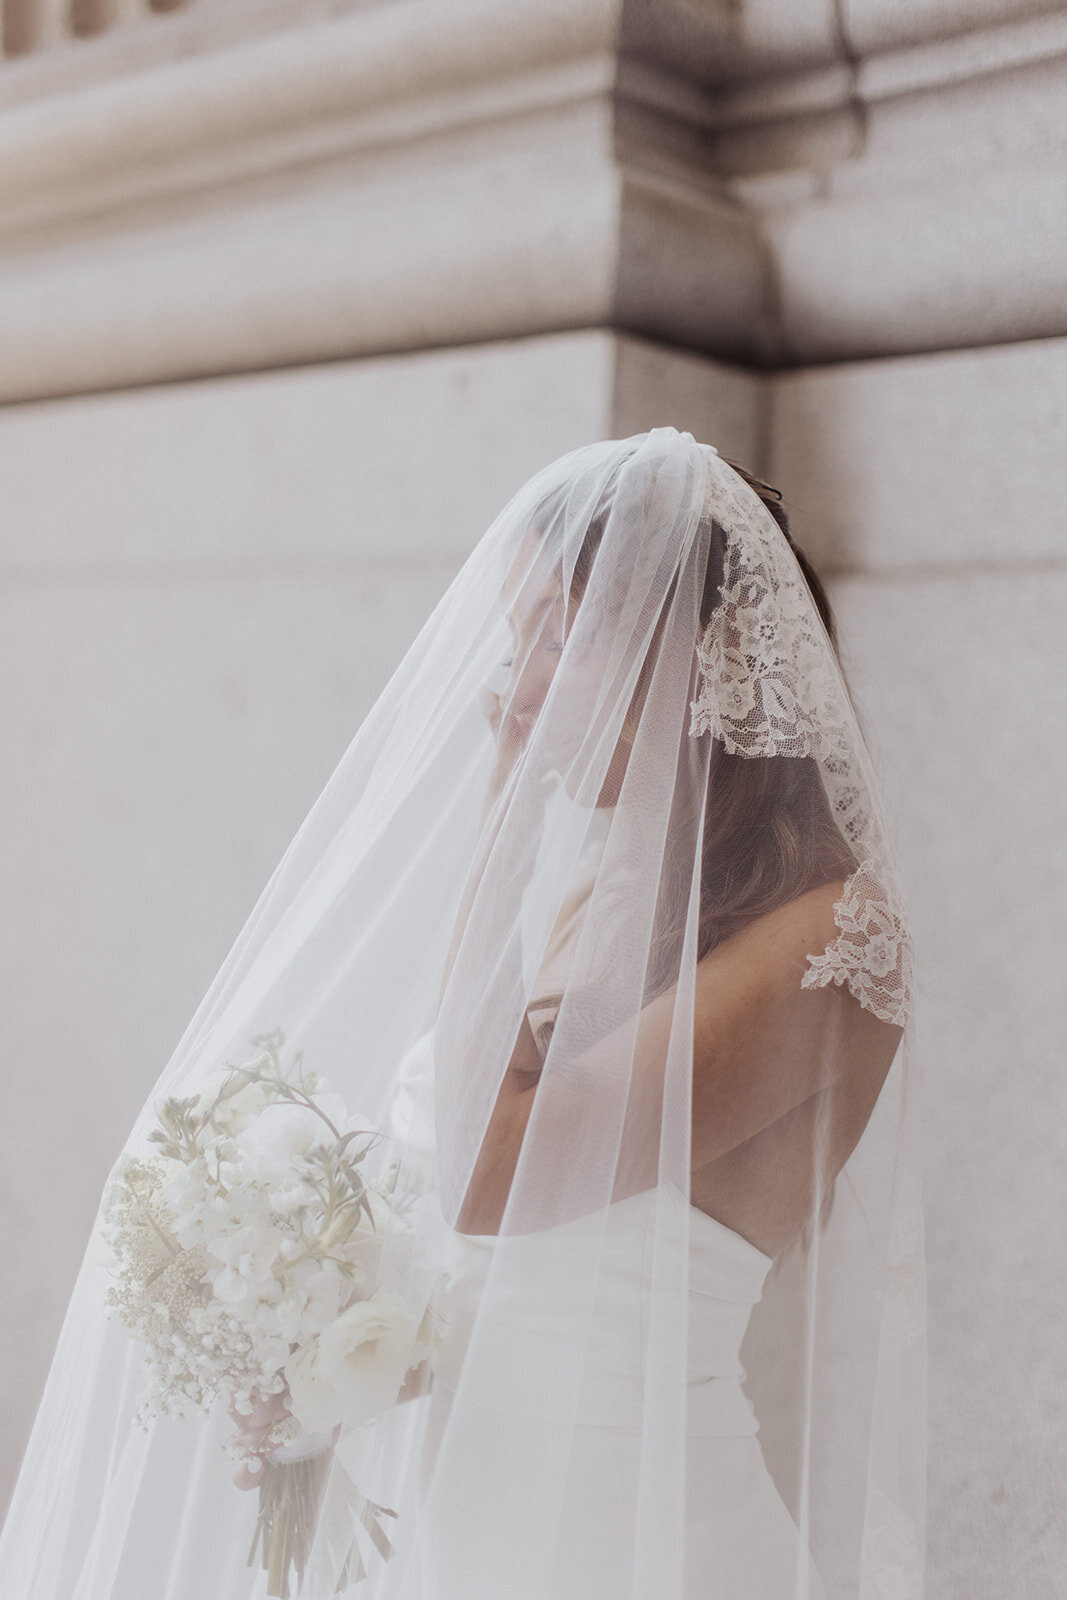 Bride in a white gown with a lace veil holding a bouquet posing for photography